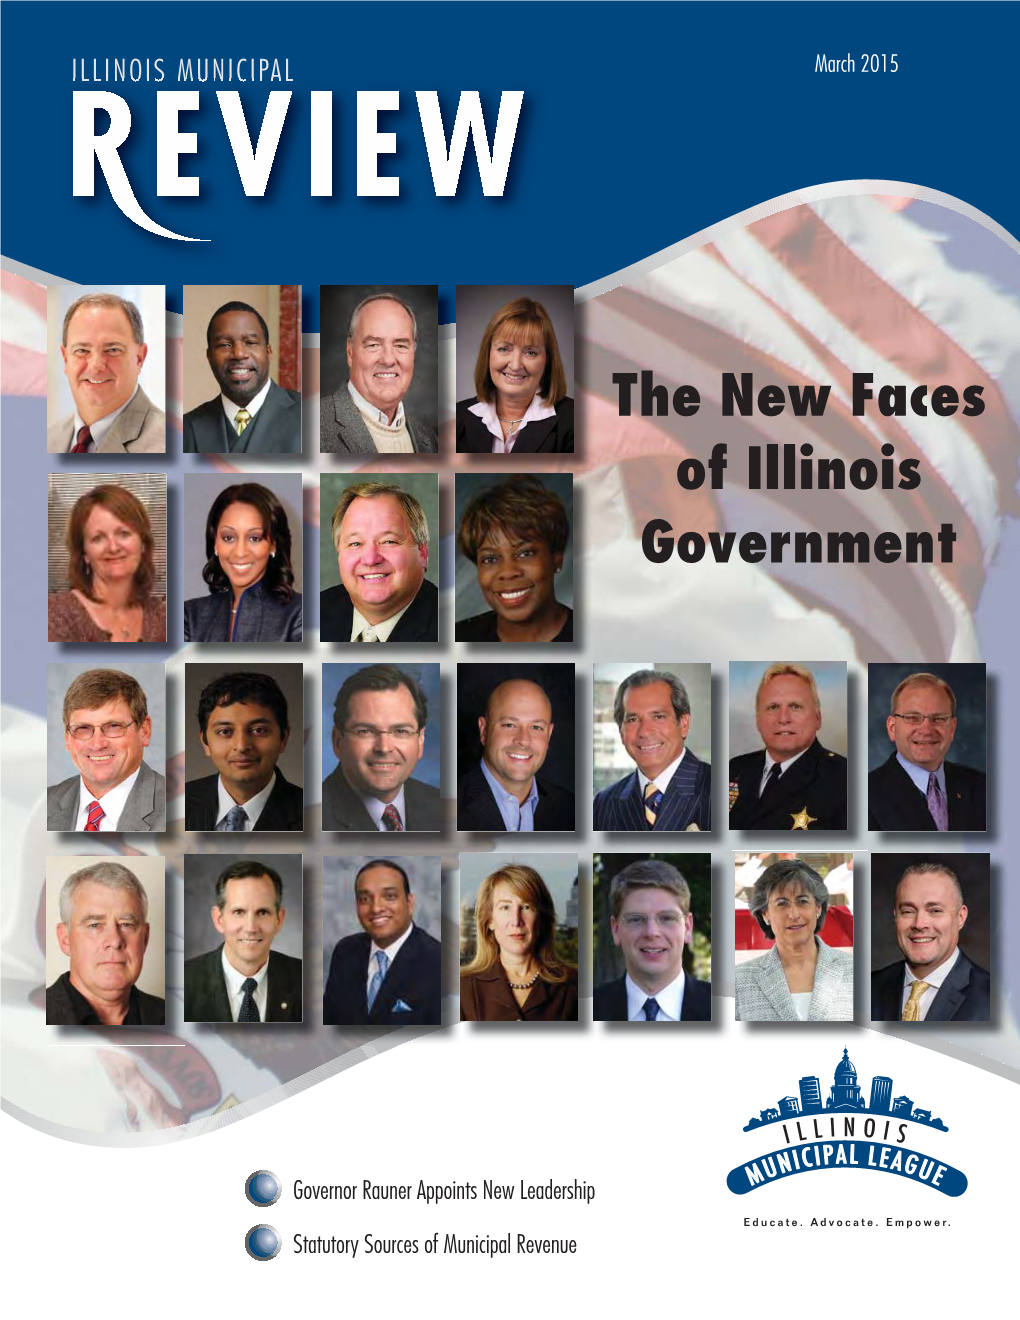 The New Faces of Illinois Government